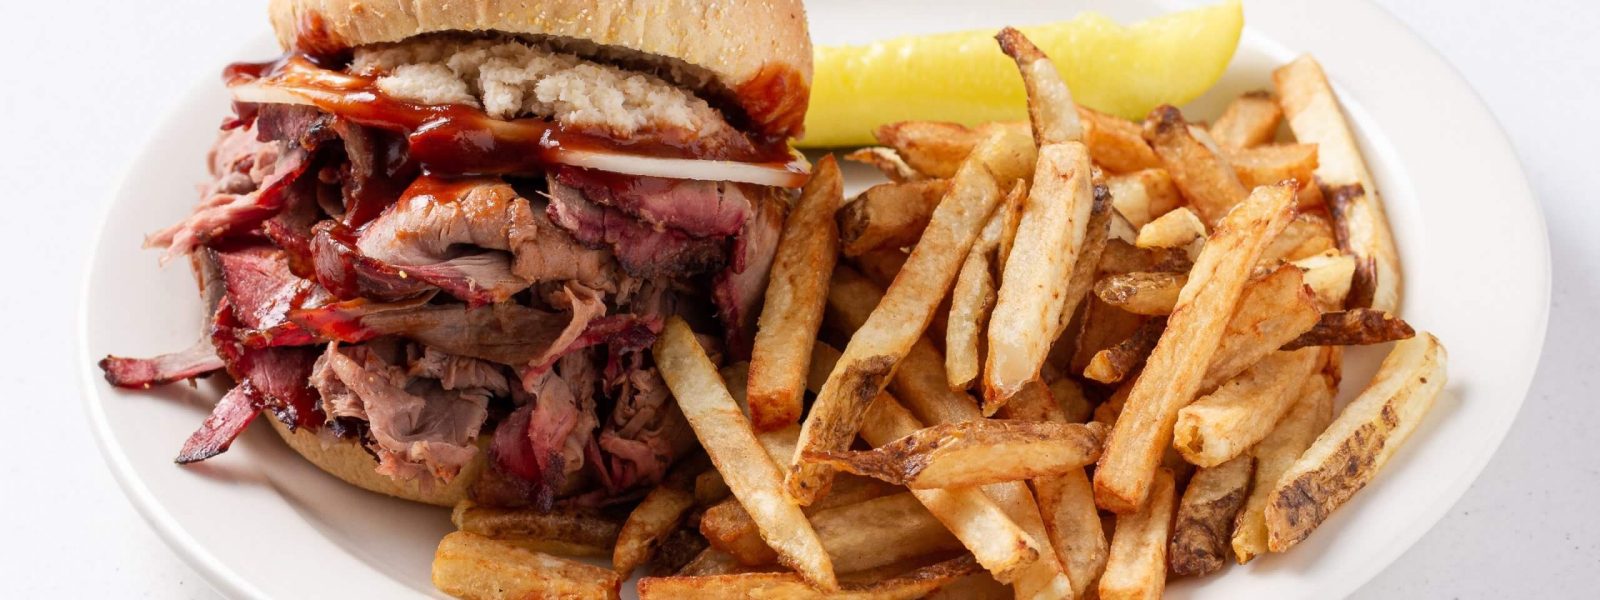 Best Pit Beef Sandwich with fries